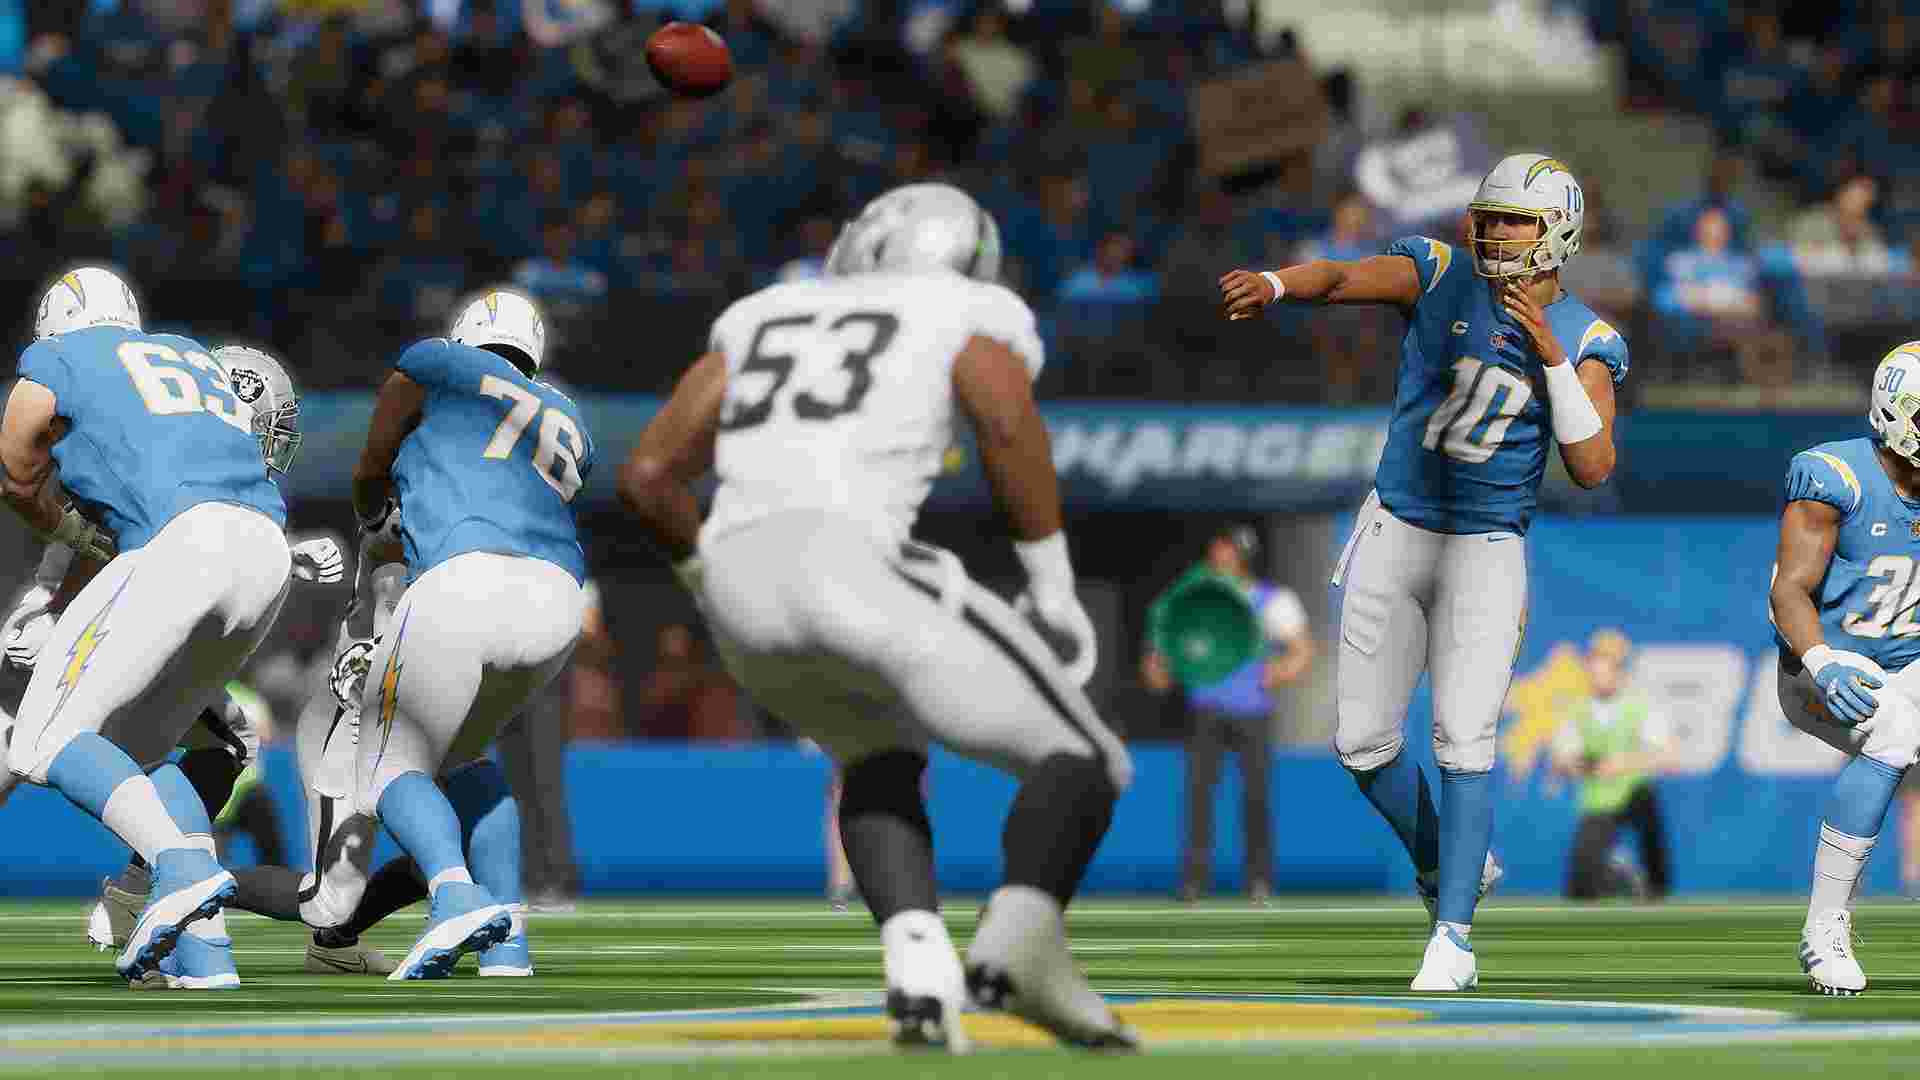 madden-nfl-23-too-many-interceptions-interception-slider-not-working-issues-troubling-players-is-there-any-fix-yet